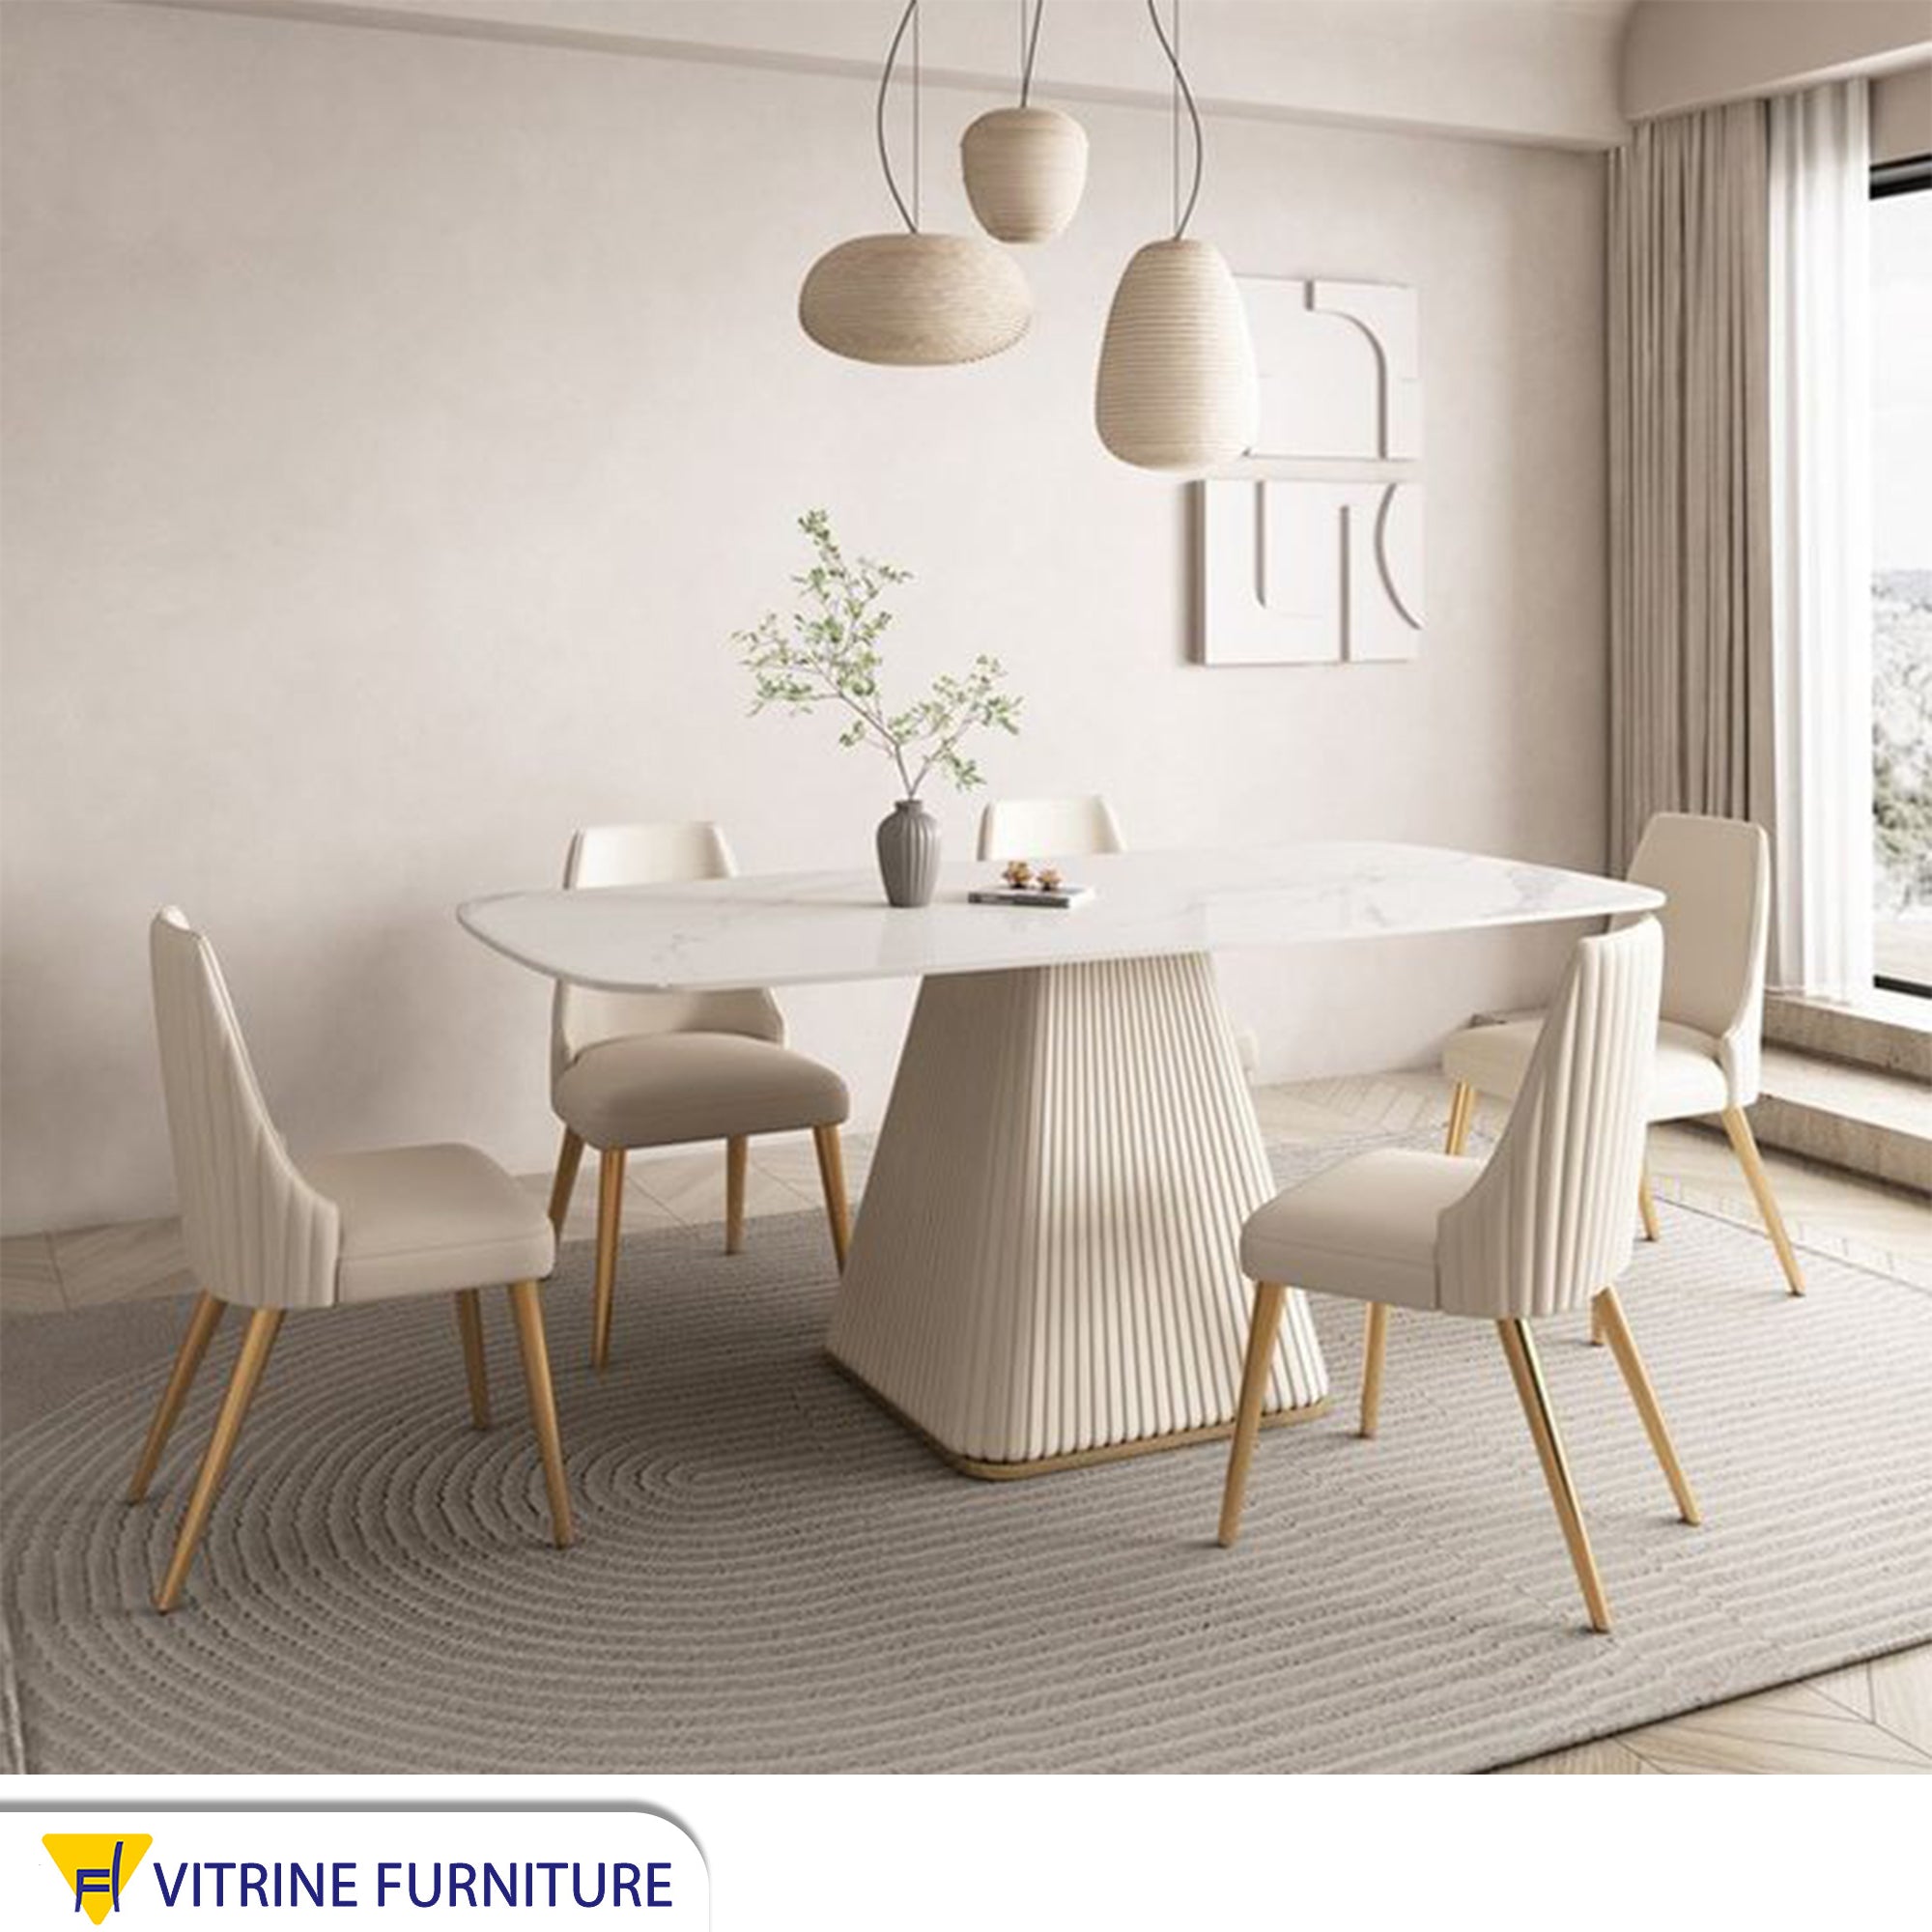 A cream-colored dining table with a unique and elegant design